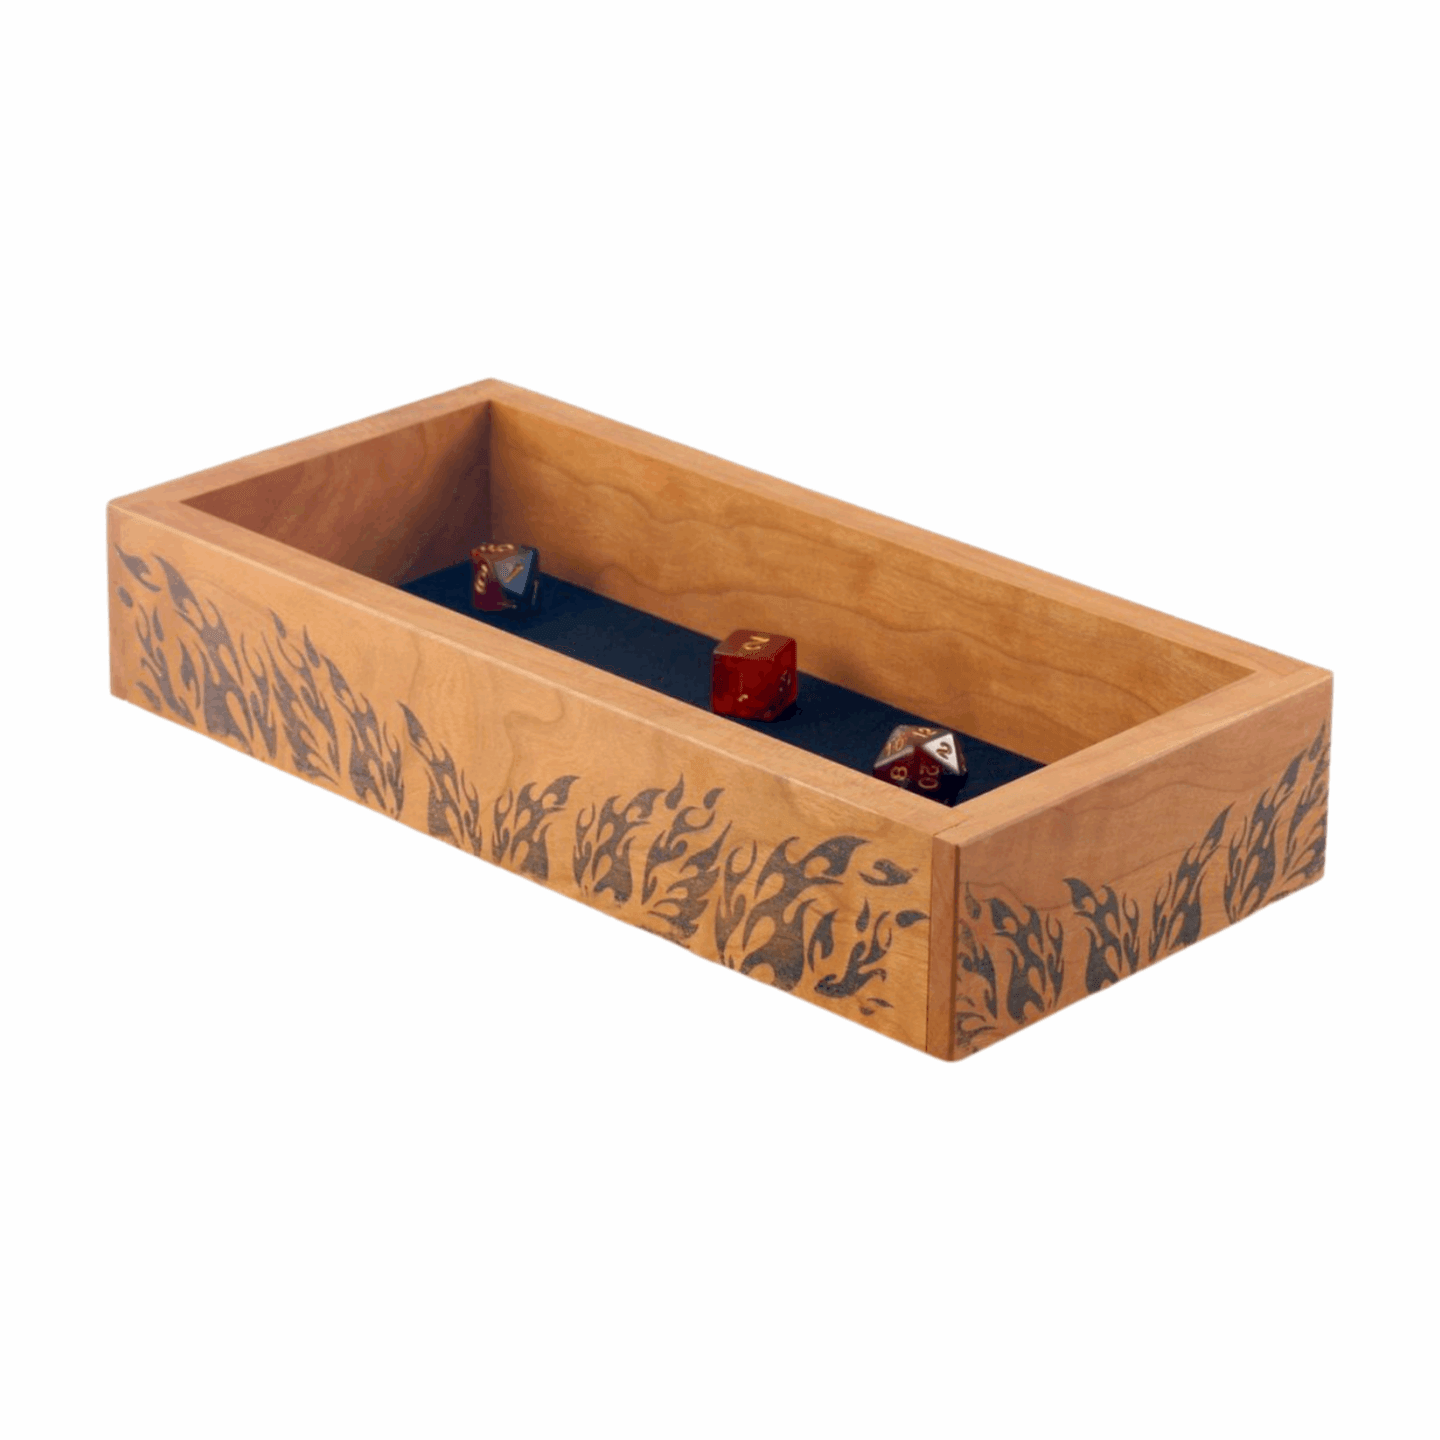 Medium Cherry Dice Tray with Flame Design - Dragon Armor Games